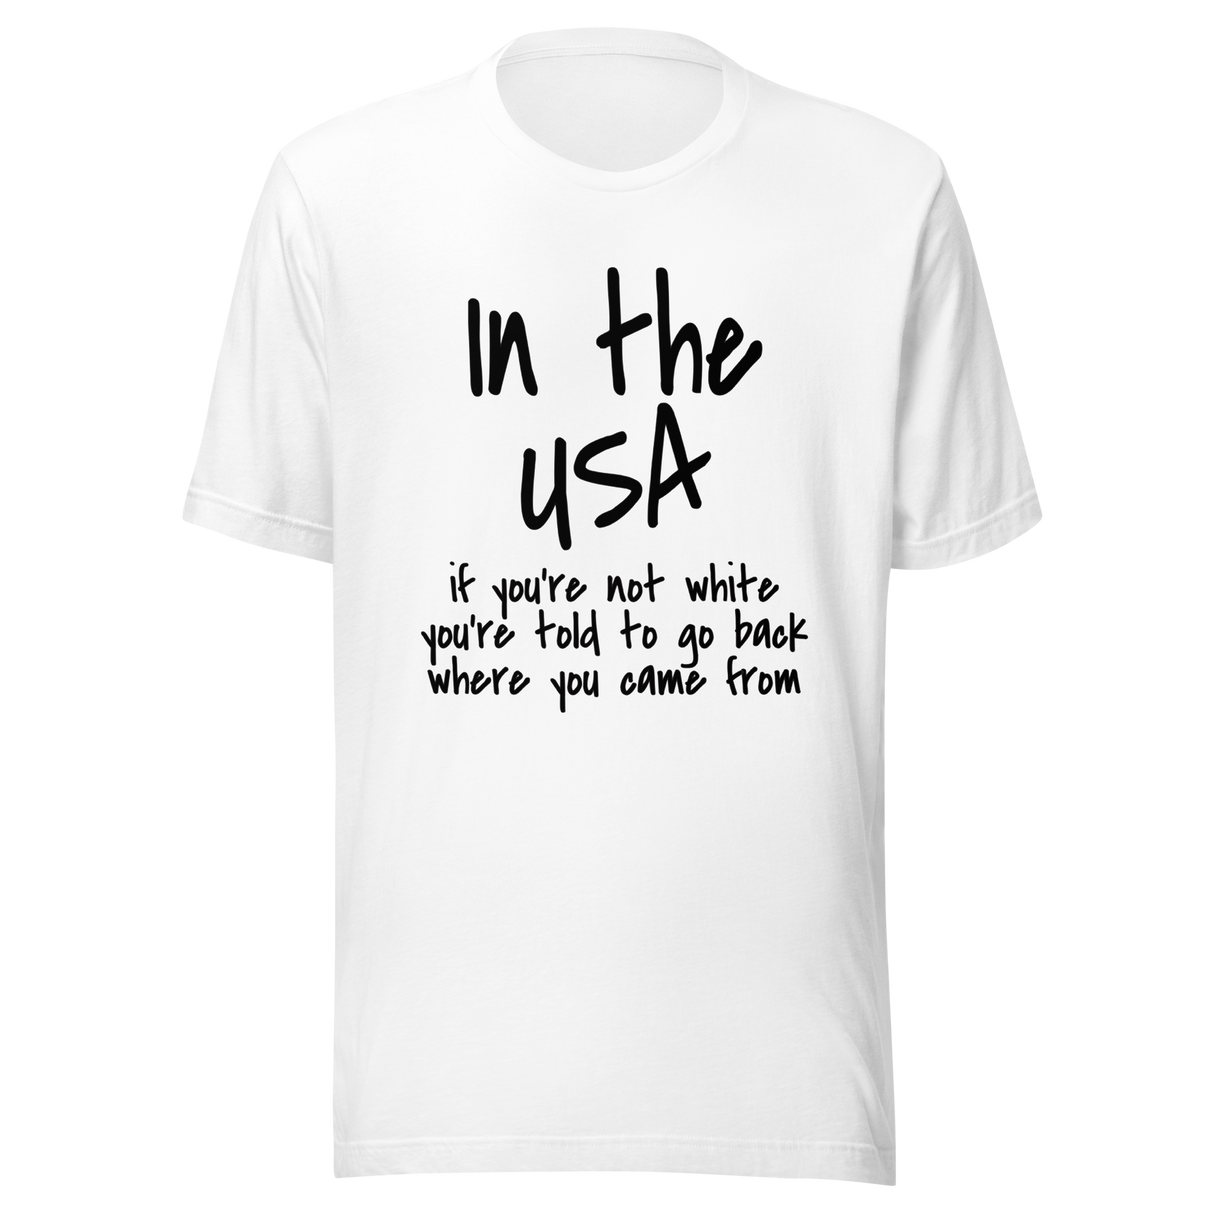 in-the-usa-if-youre-not-white-youre-told-to-go-back-where-you-came-from-usa-tee-government-t-shirt-white-people-tee-t-shirt-tee#color_white